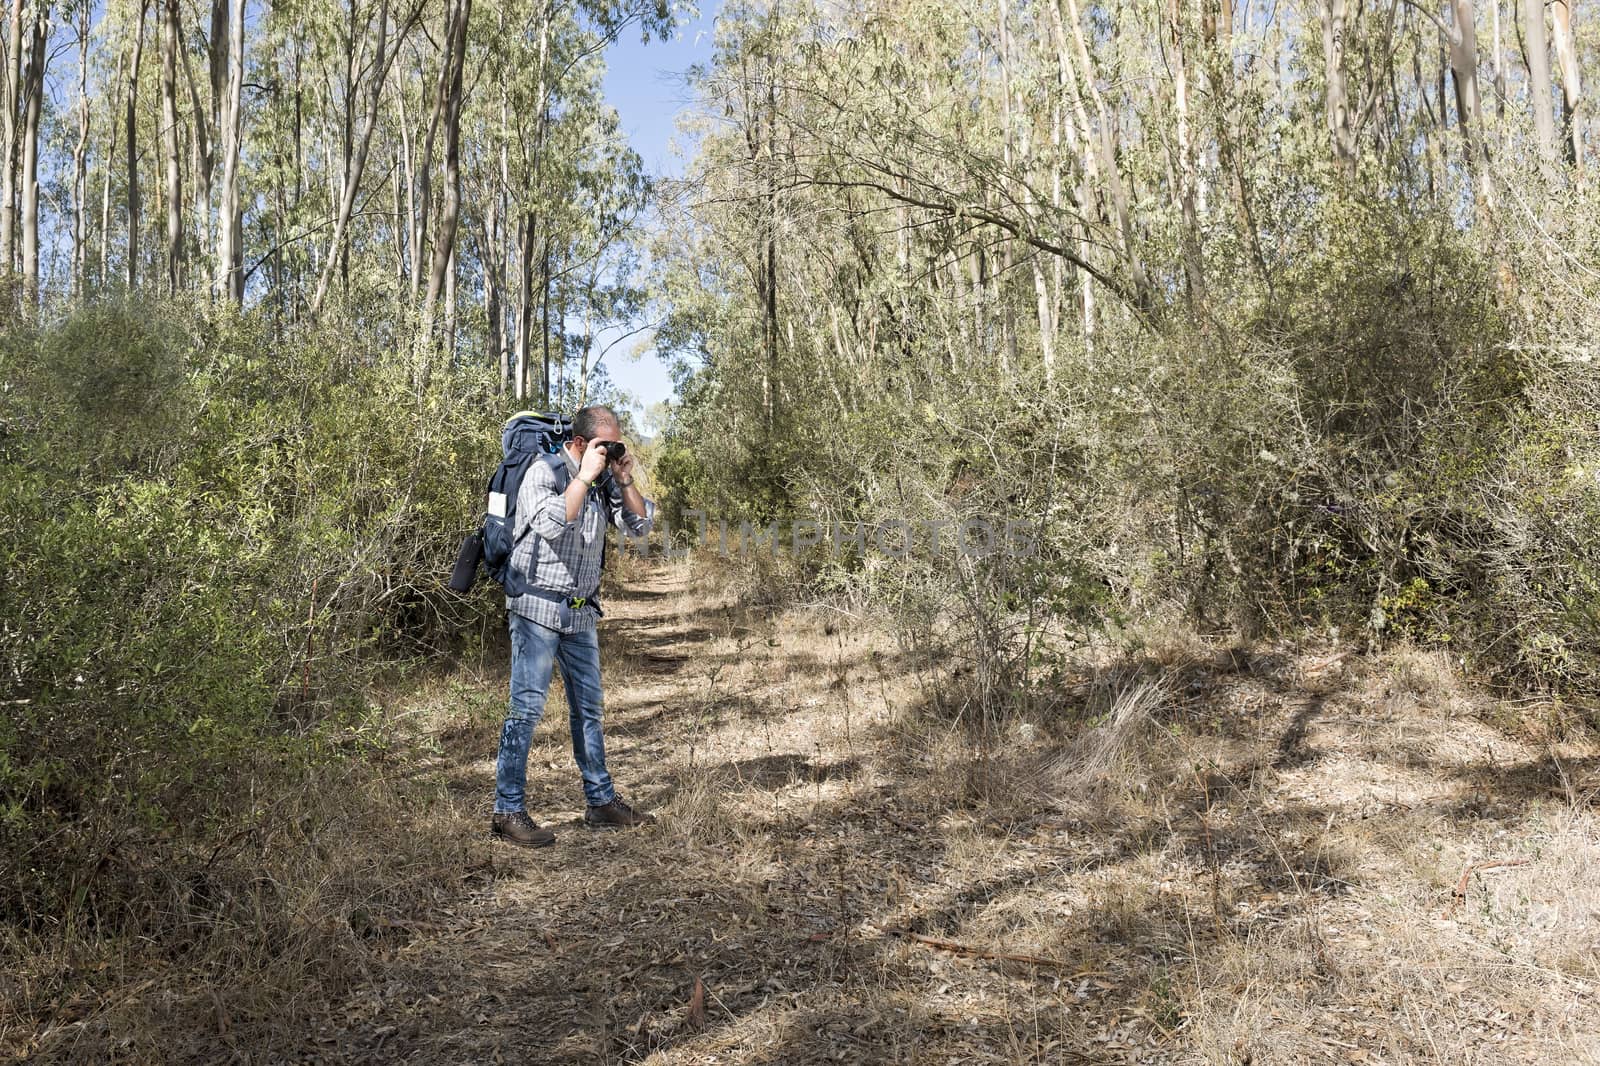 Hiker in the Sardinian Forest with mirrorless camera